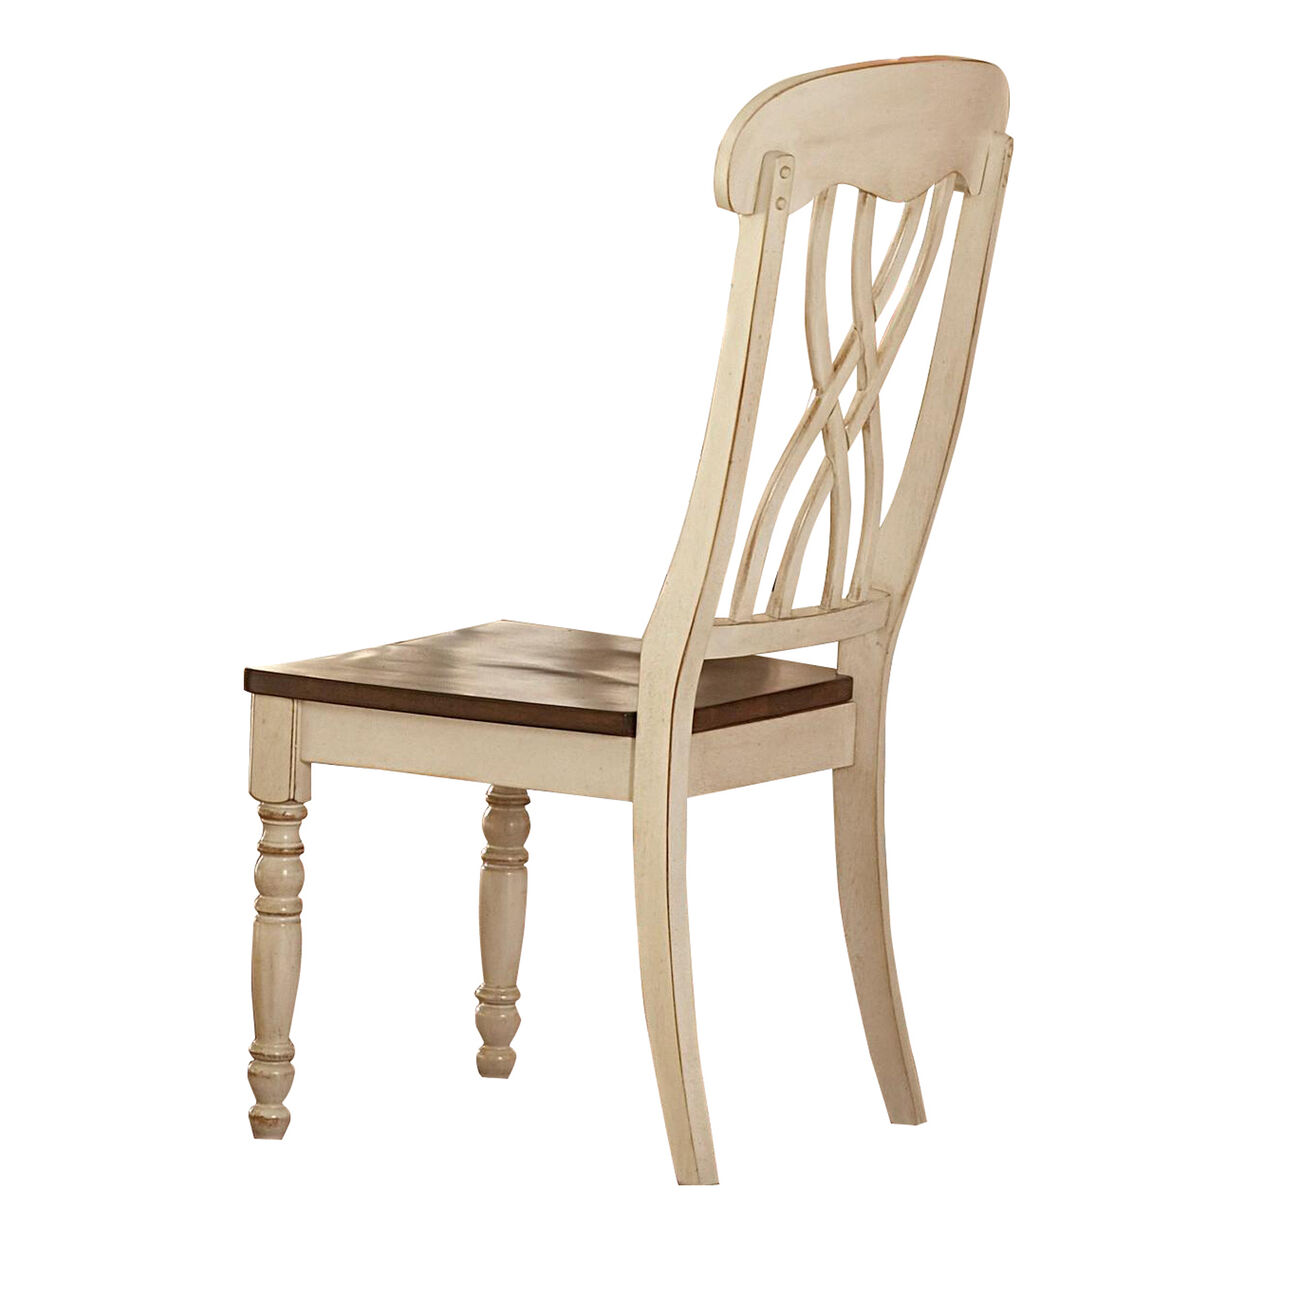 Traditional Style Dining Chair with Turned Legs, White and Brown